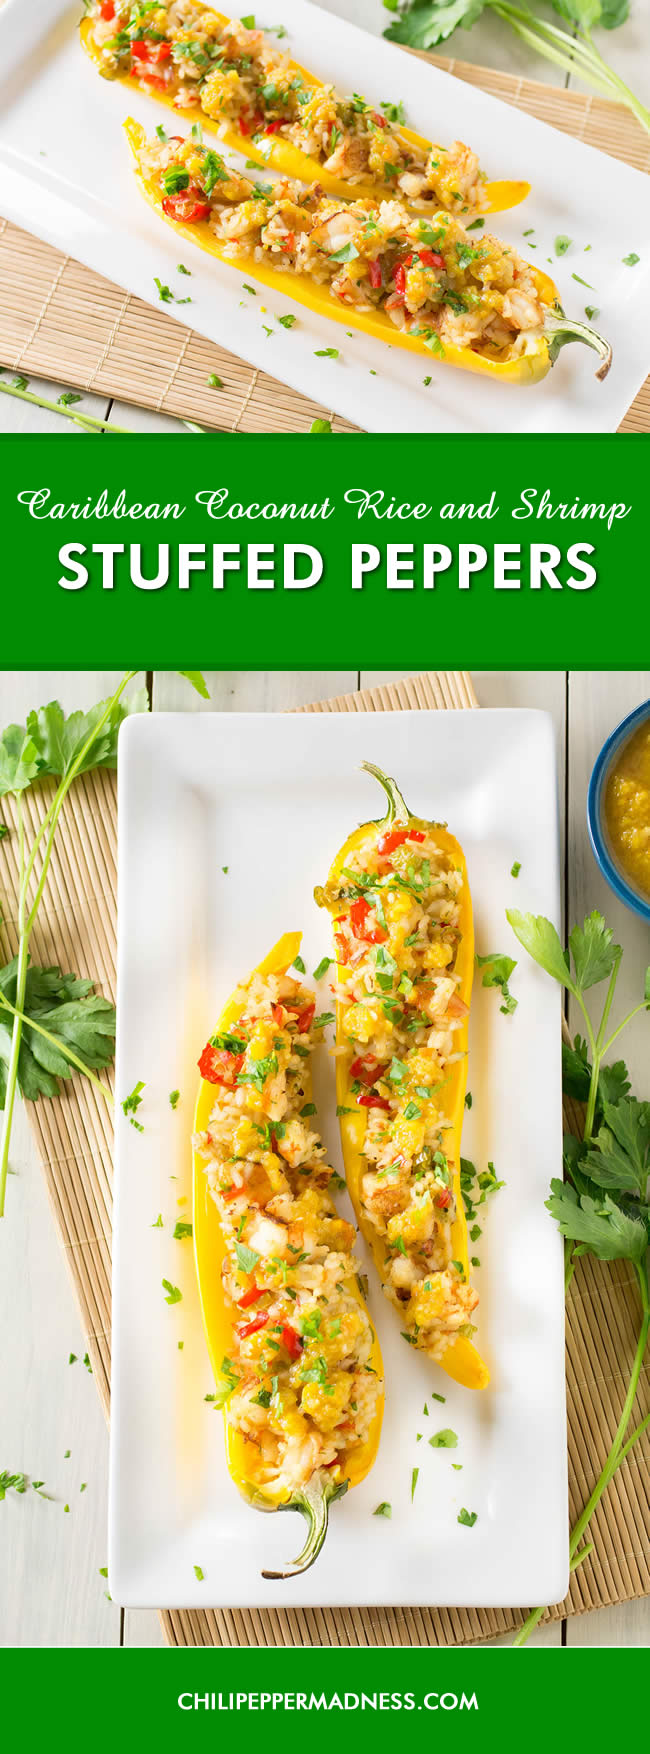 Caribbean Coconut Rice and Shrimp Stuffed Peppers - Recipe